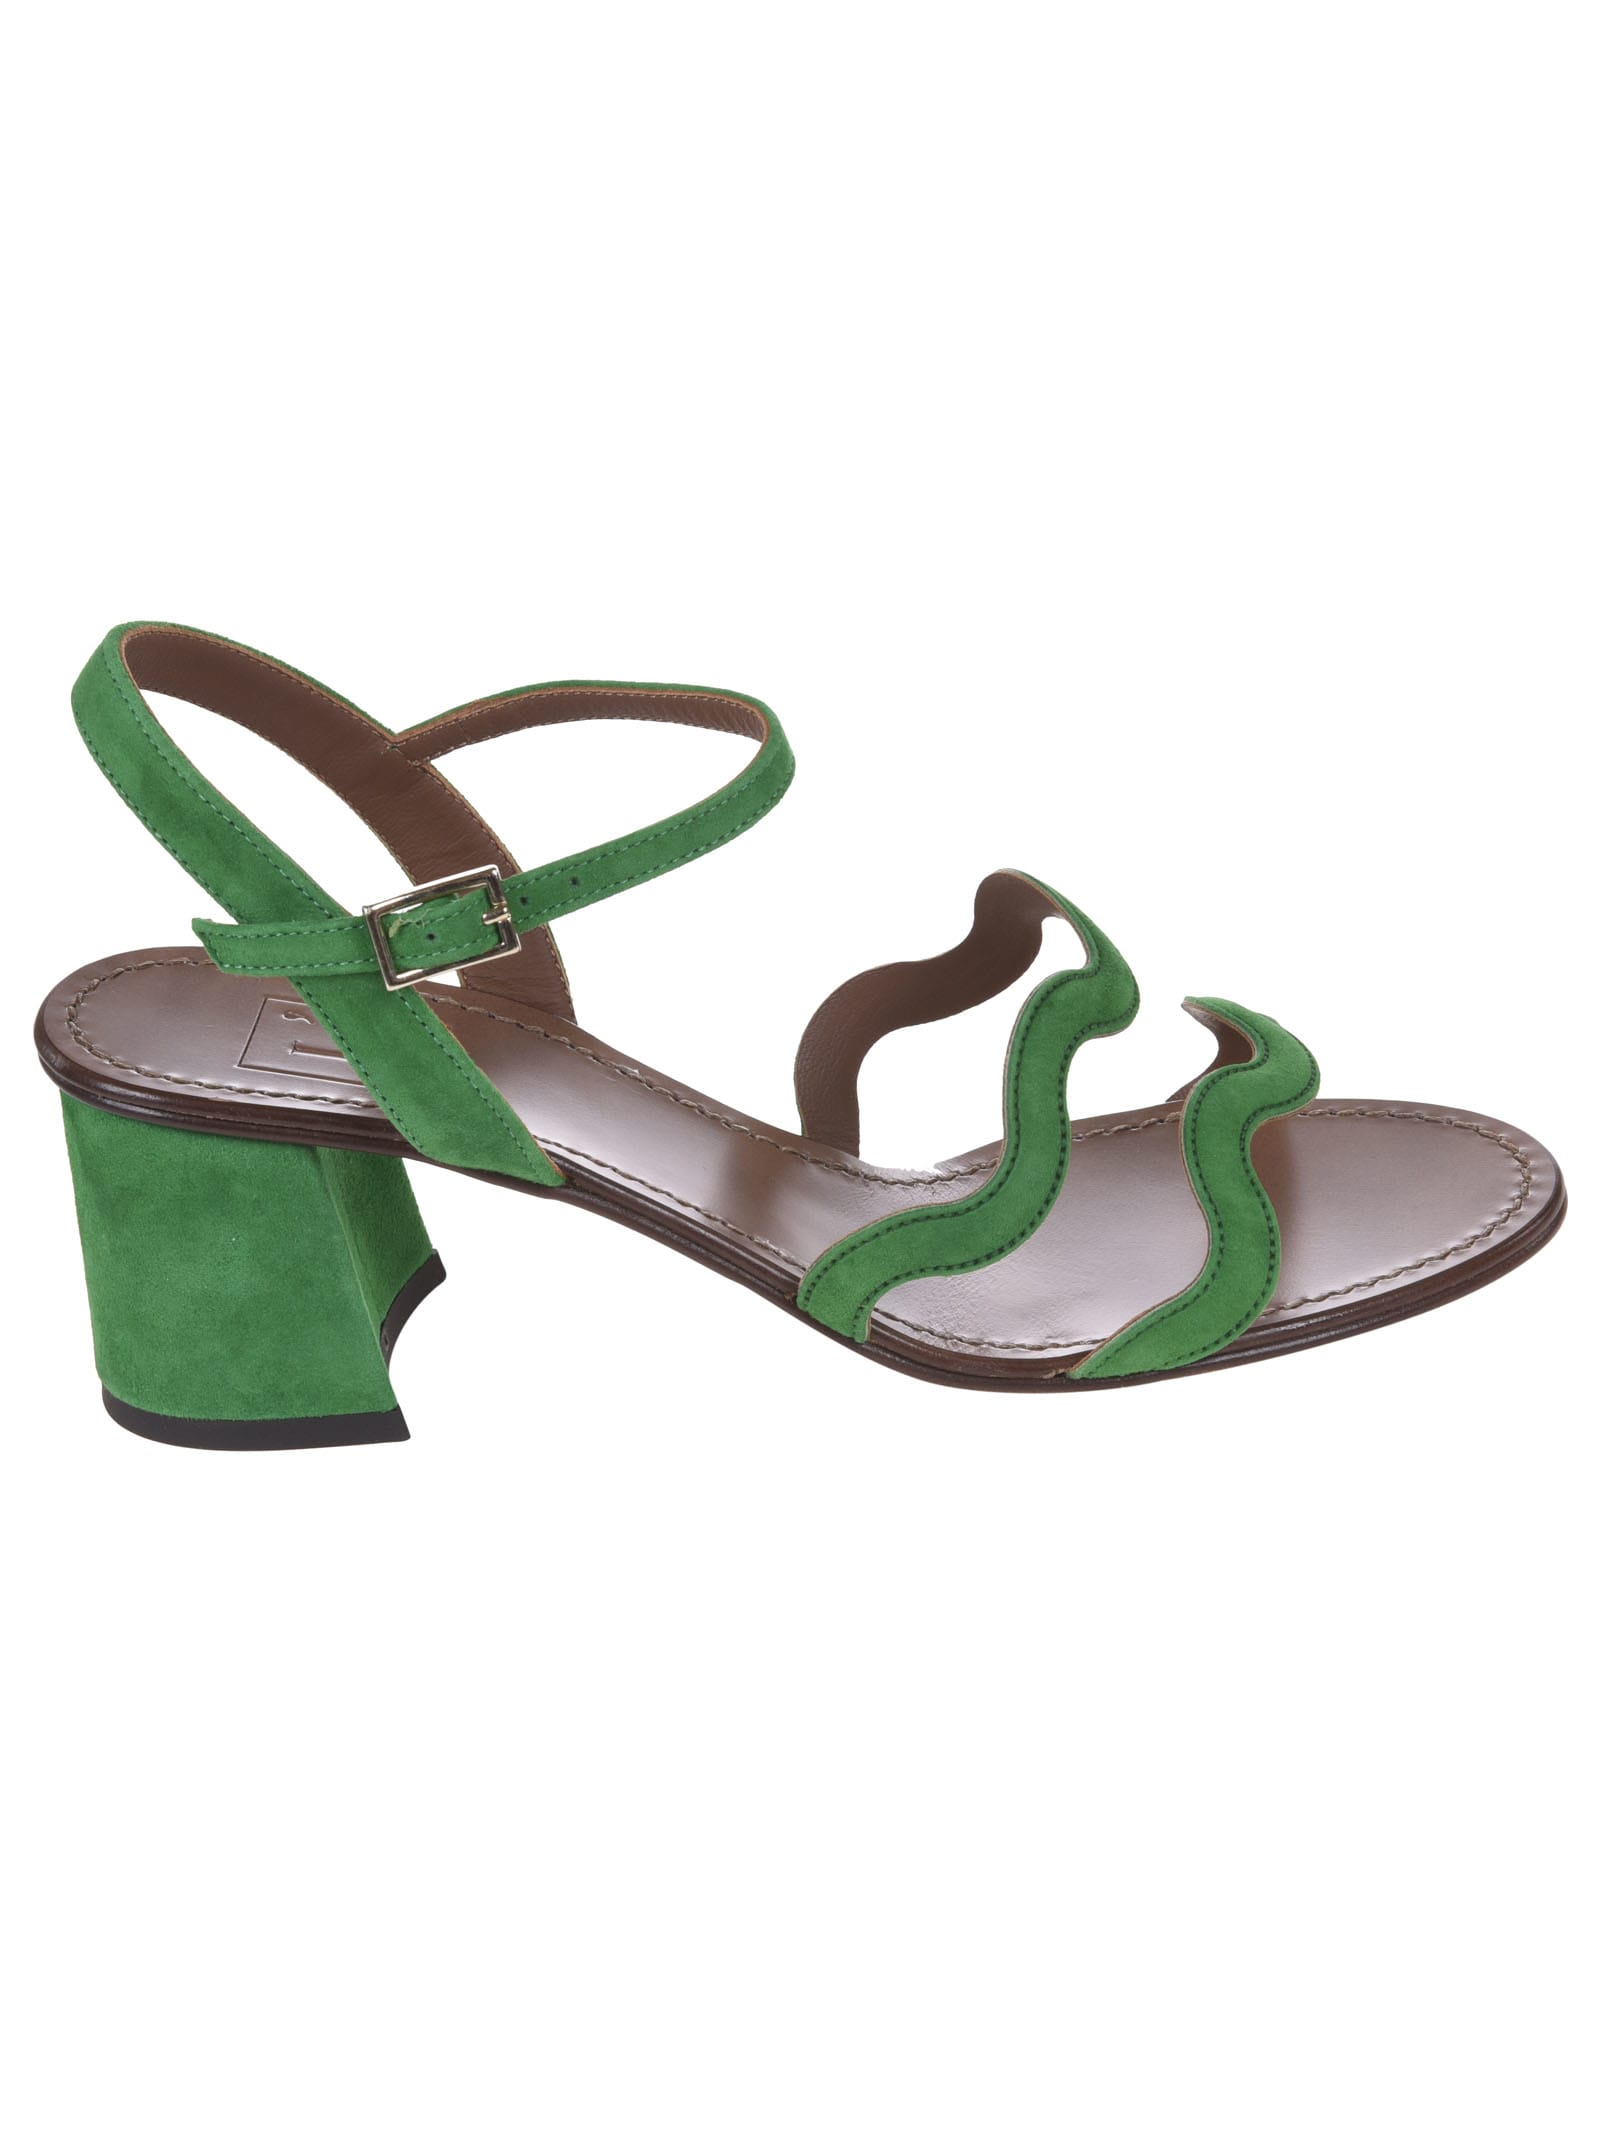 LAutre Chose Side Buckled Strappy Sandals